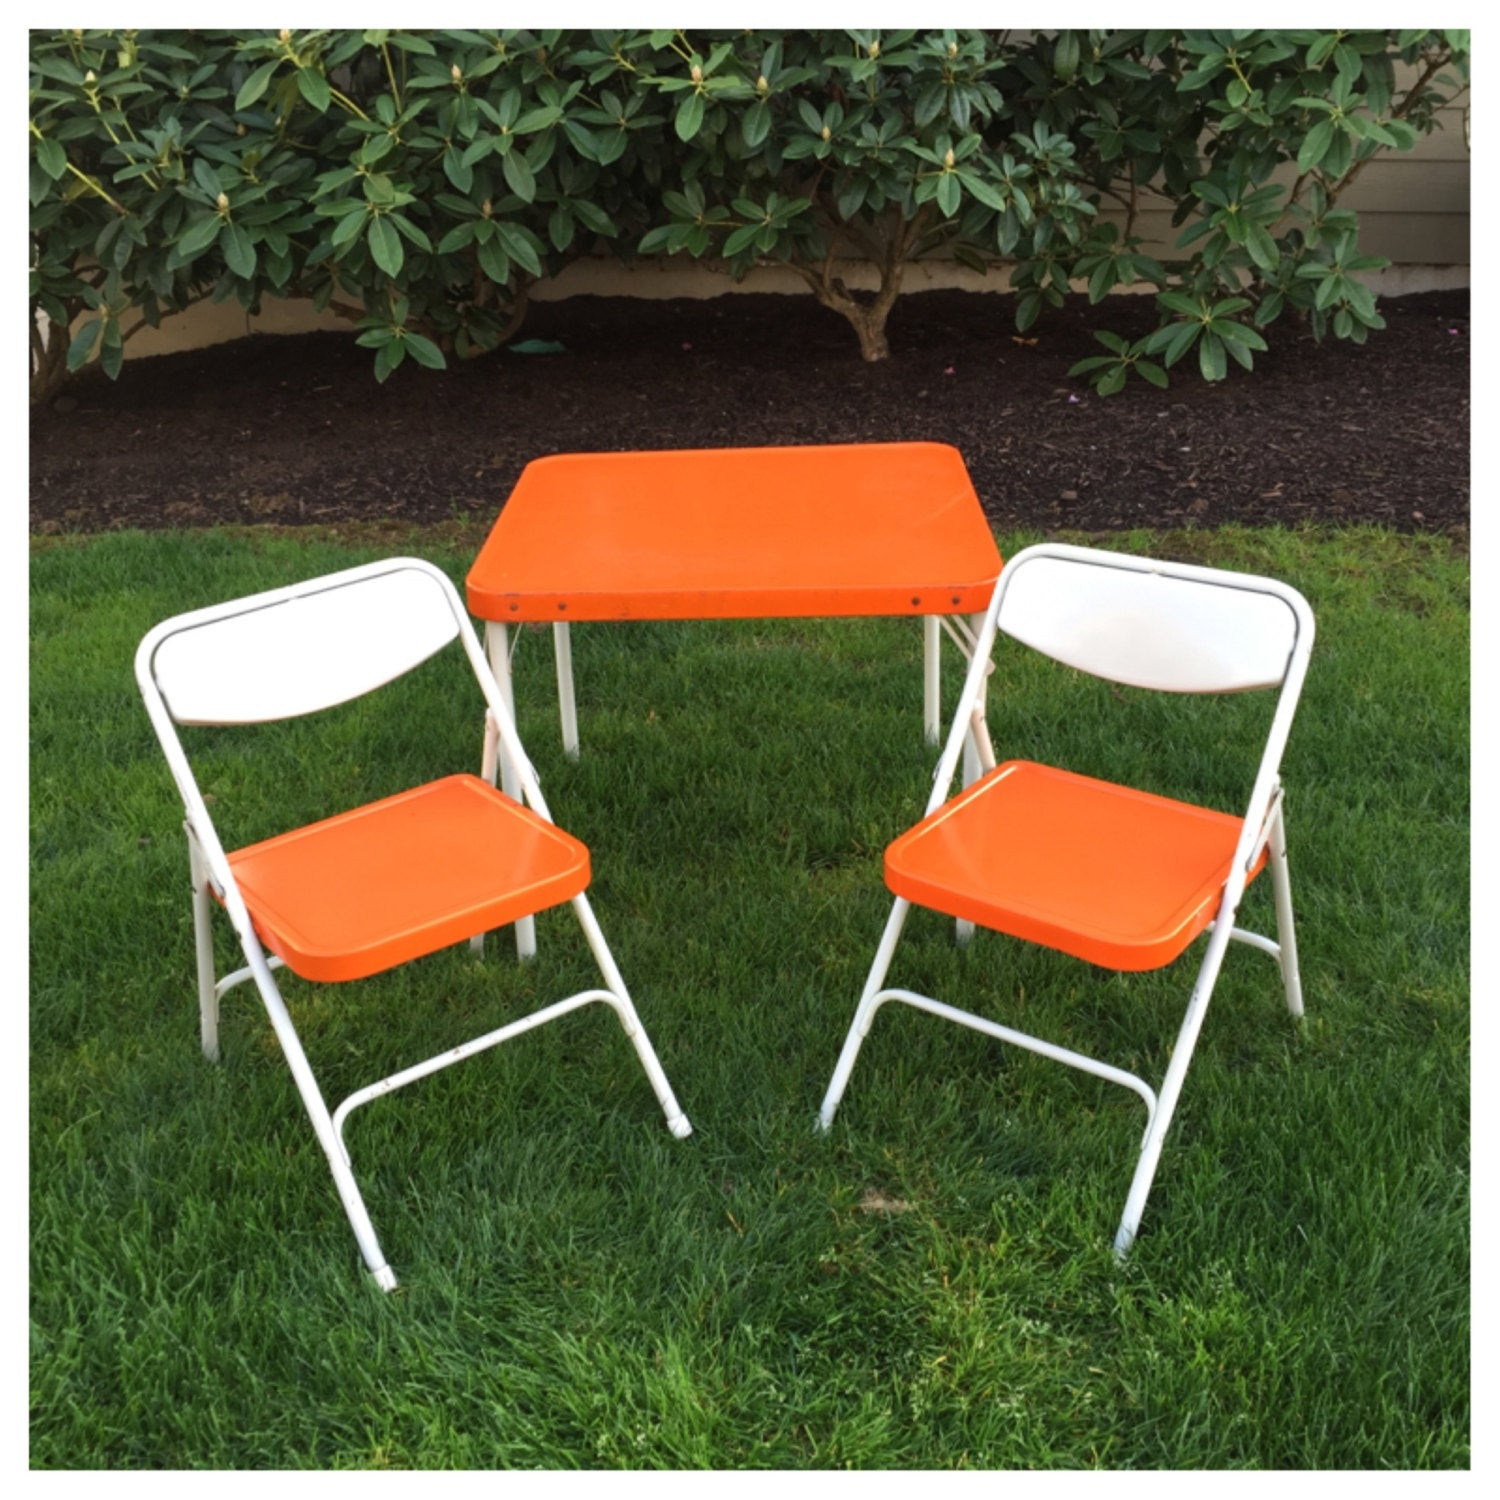 Kids Foldable Table And Chairs
 Vintage Orange Samsonite Child’s Table & Chairs Folding